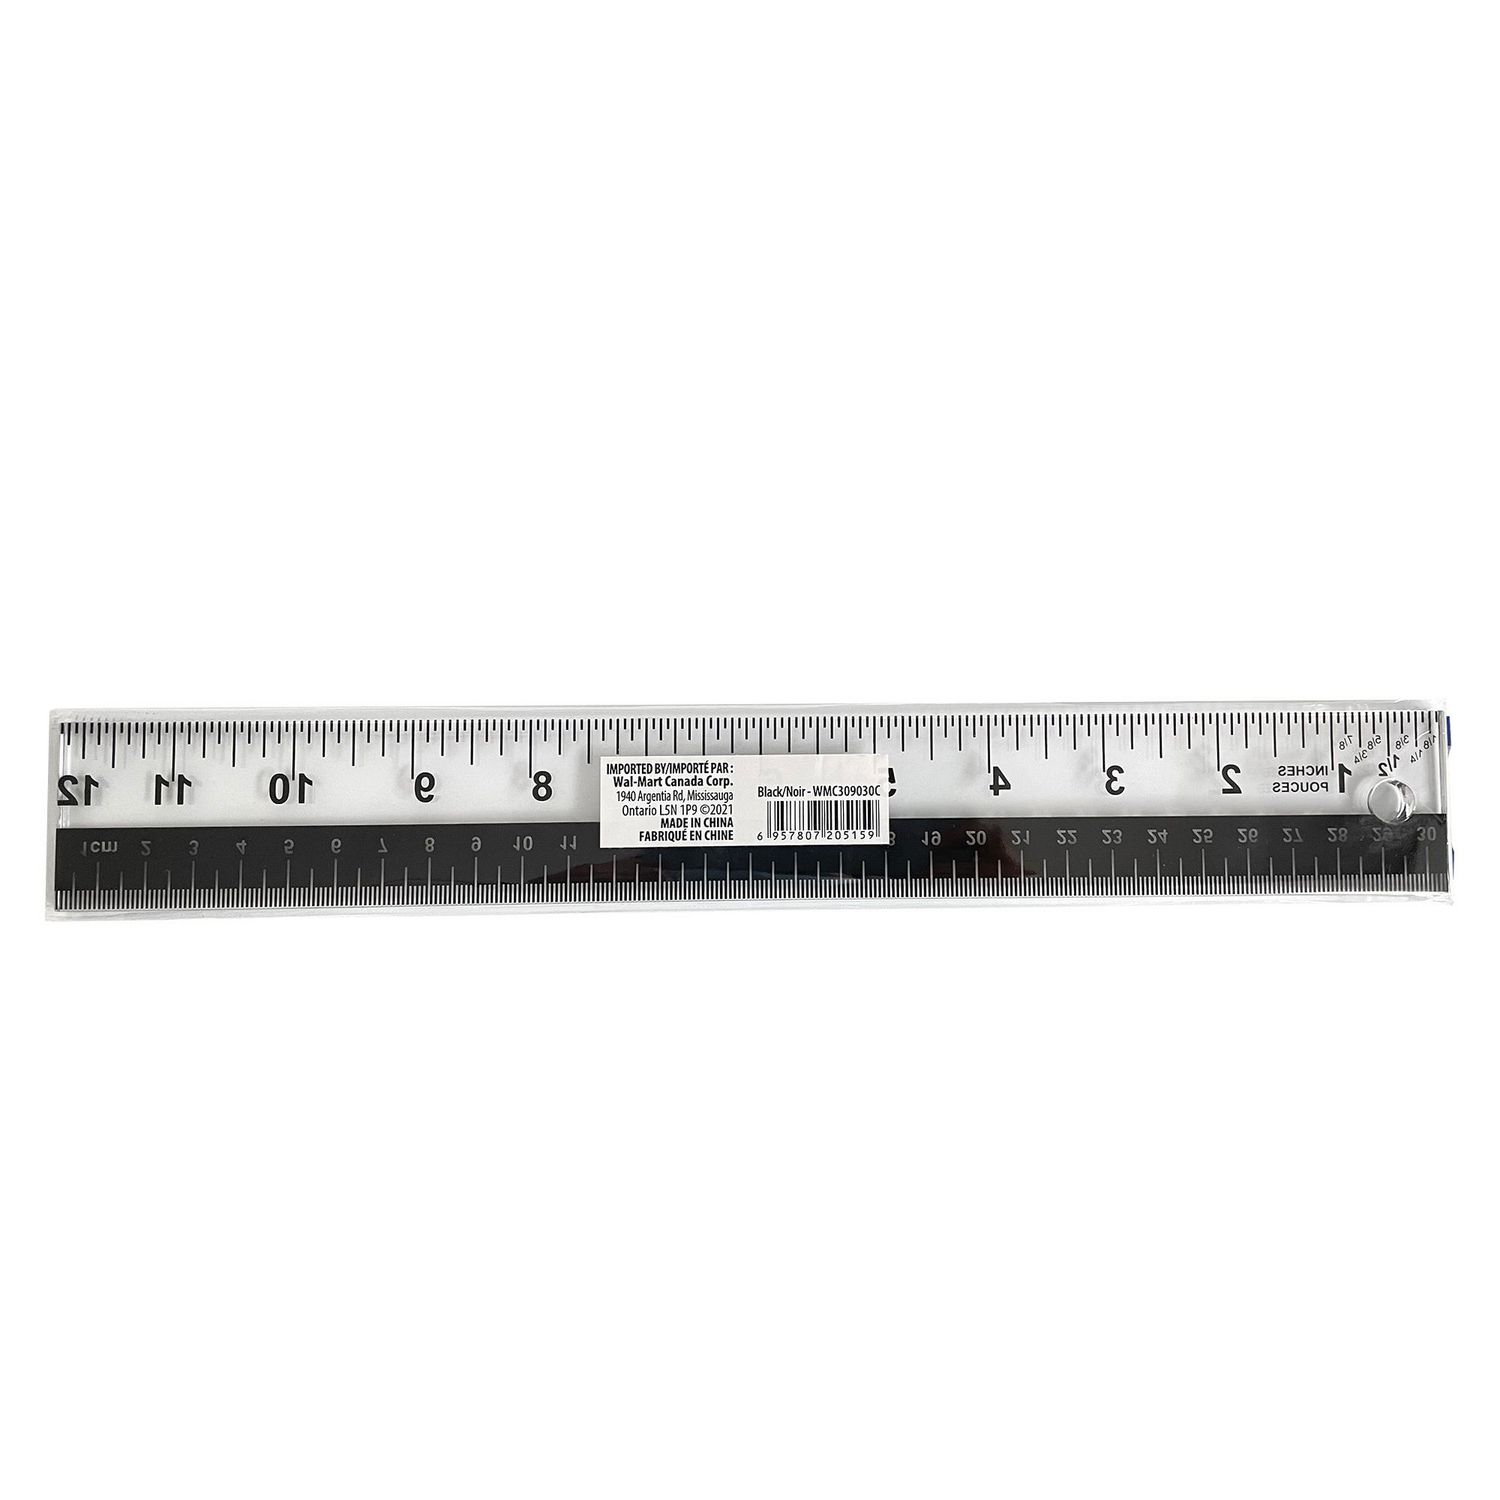 20cm 8 Inches Measurement Straight Ruler Tool